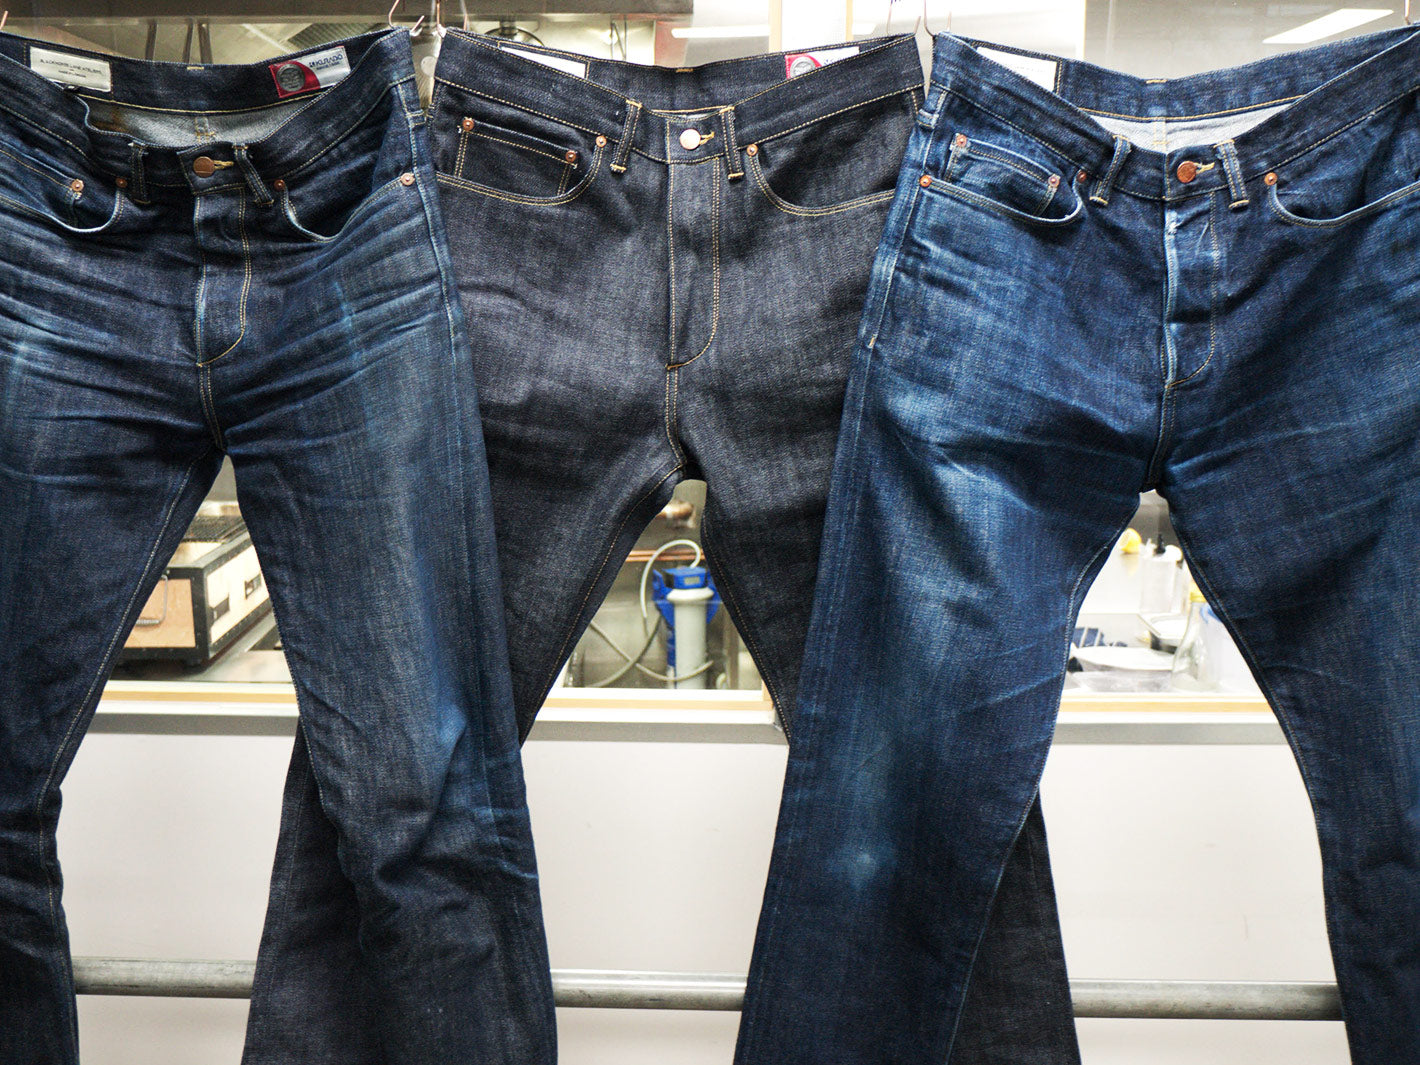 How to Wash Raw Denim Jeans - Todd Shelton Blog